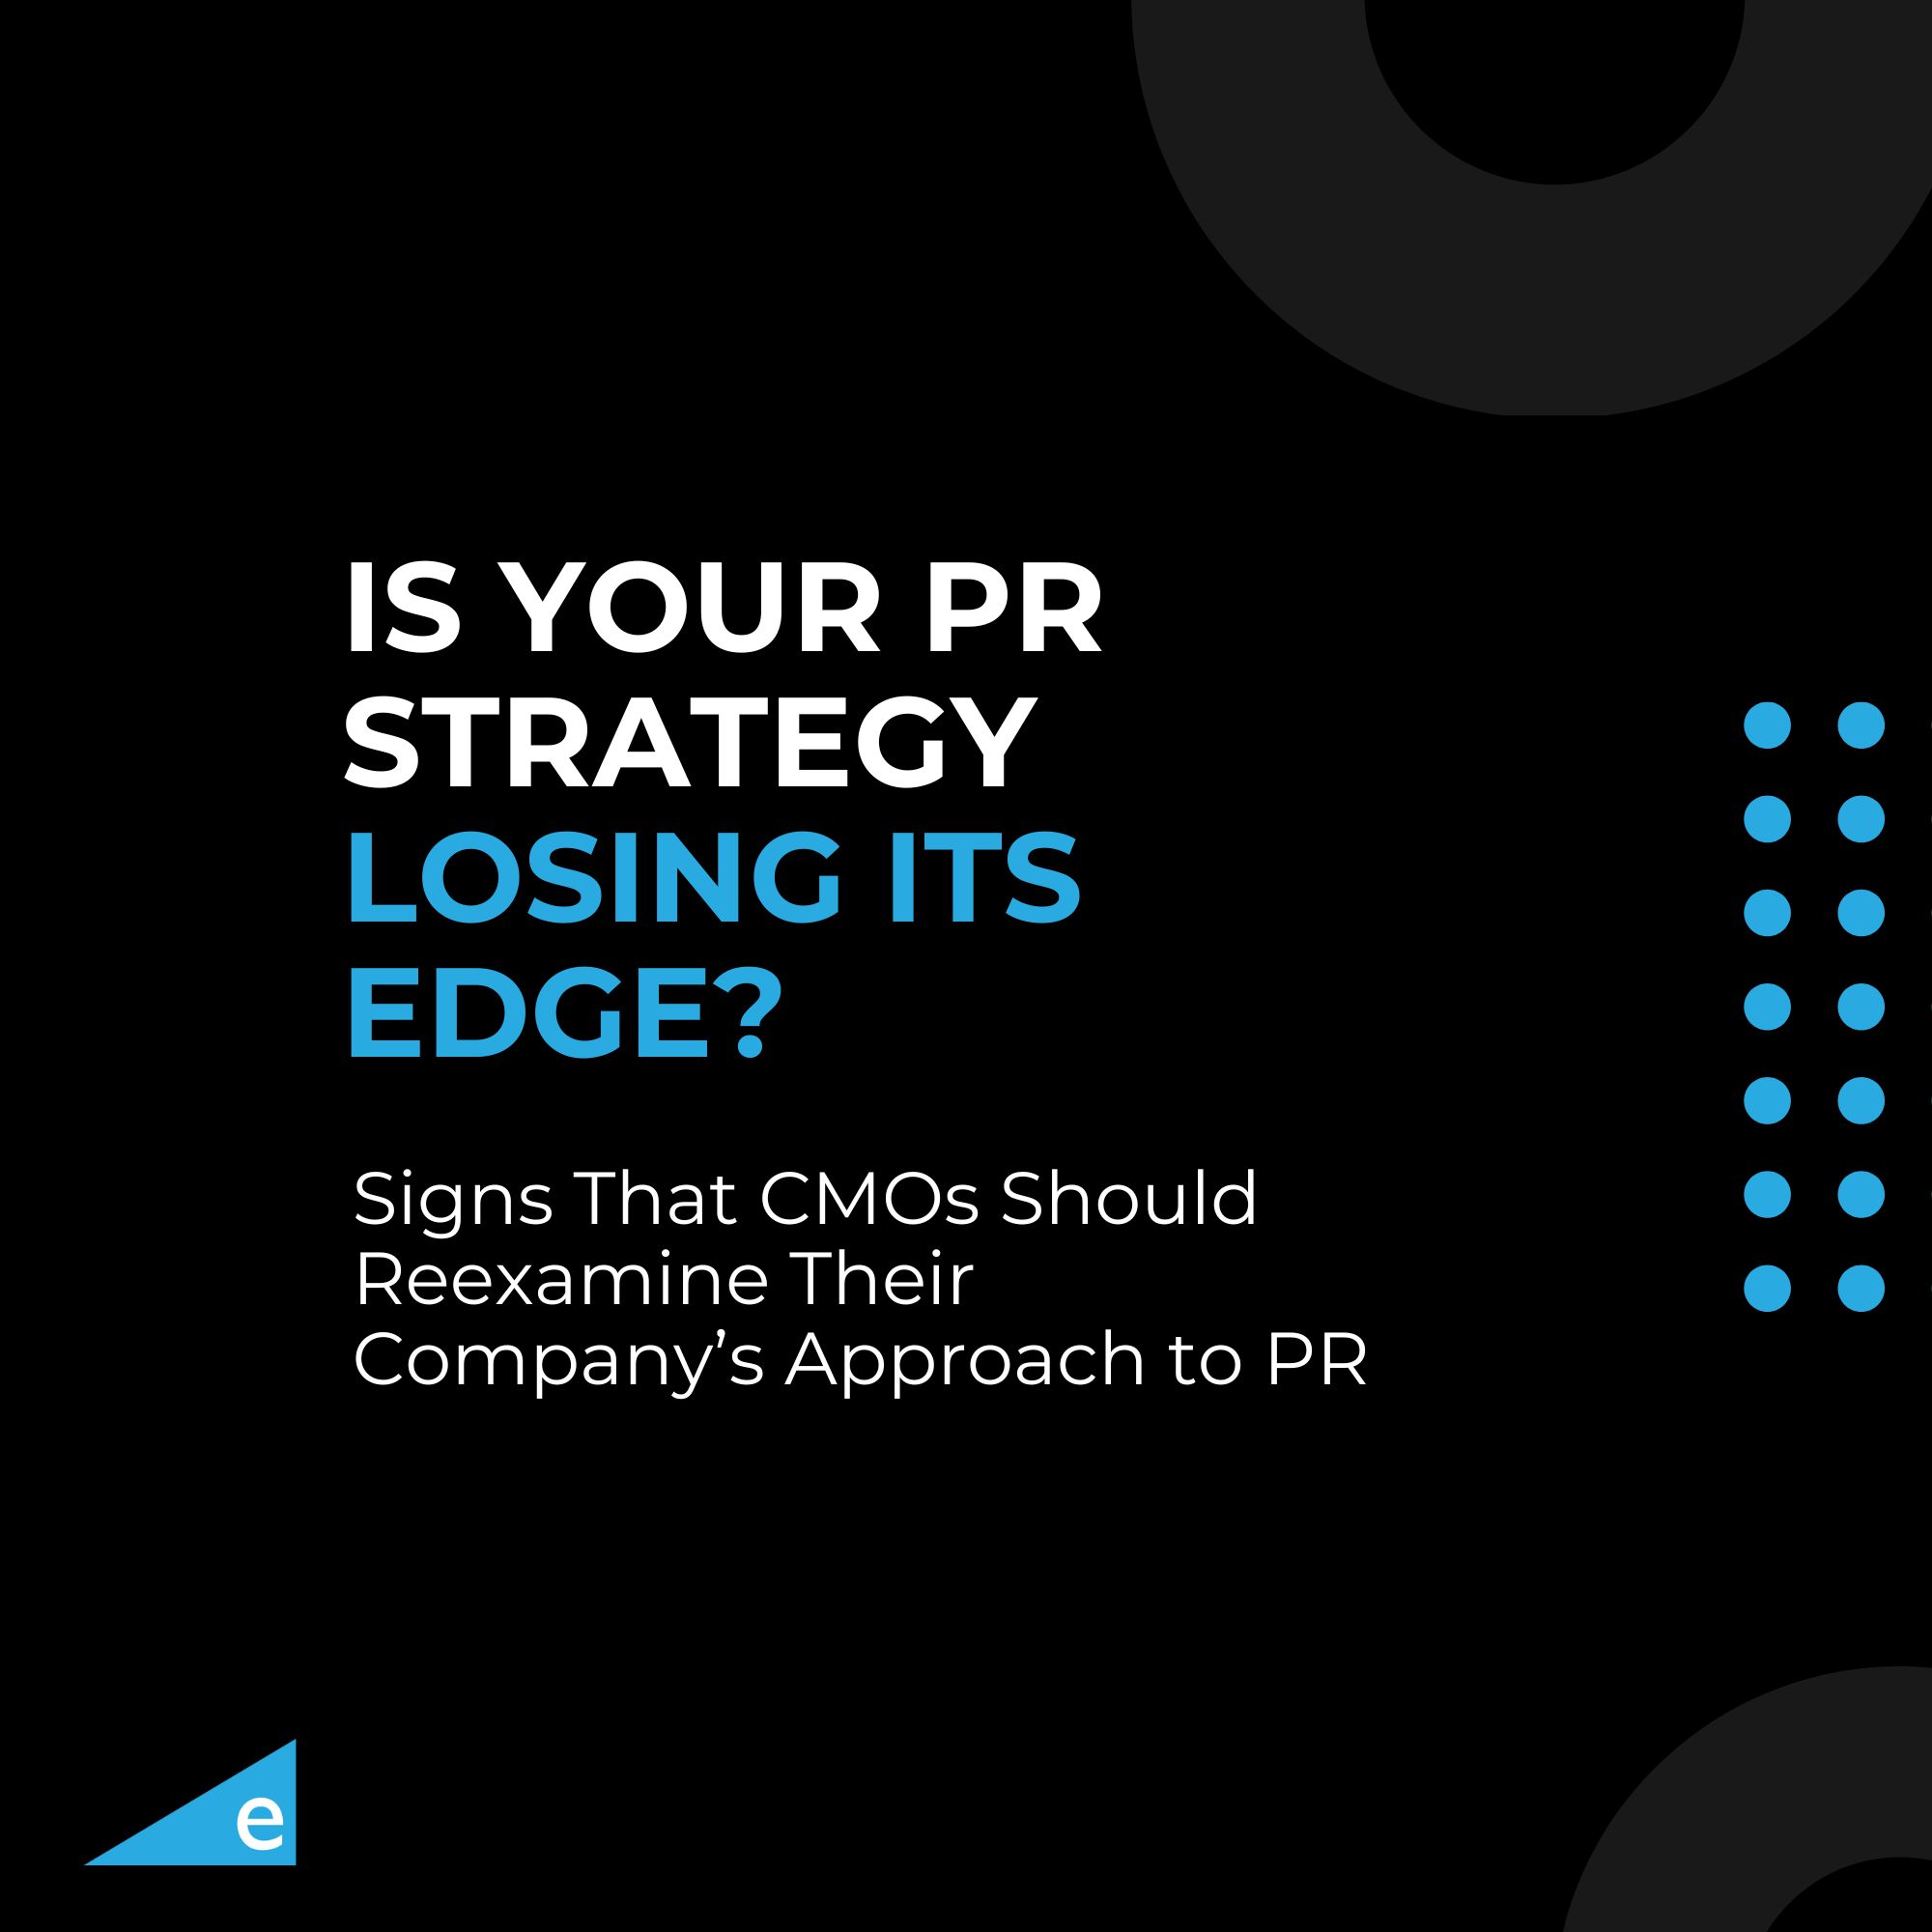 Is your PR strategy losing its edge? Signs that CMOs should reexamine their approach to PR